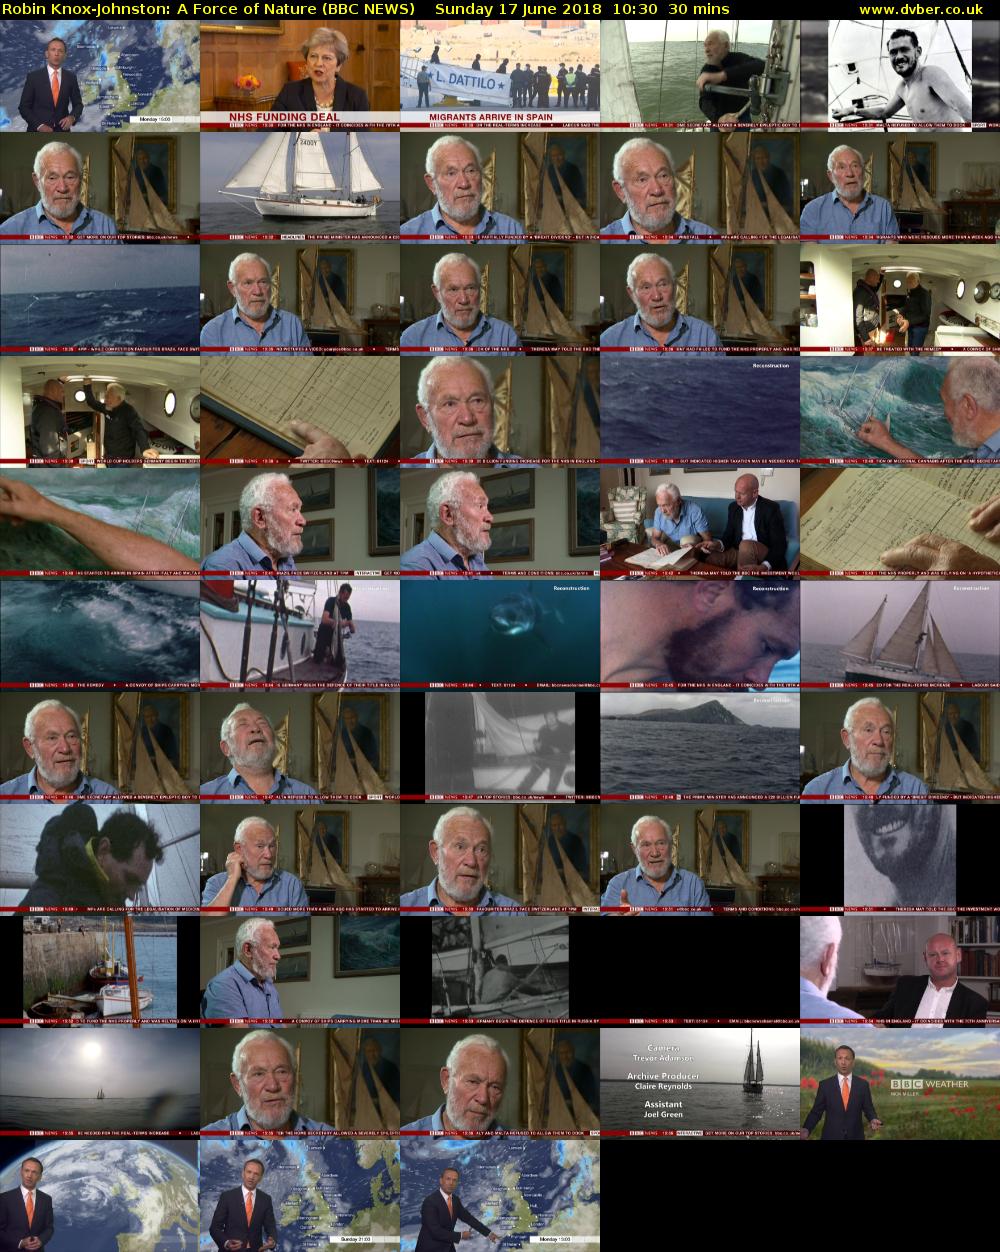 Robin Knox-Johnston: A Force of Nature (BBC NEWS) Sunday 17 June 2018 10:30 - 11:00